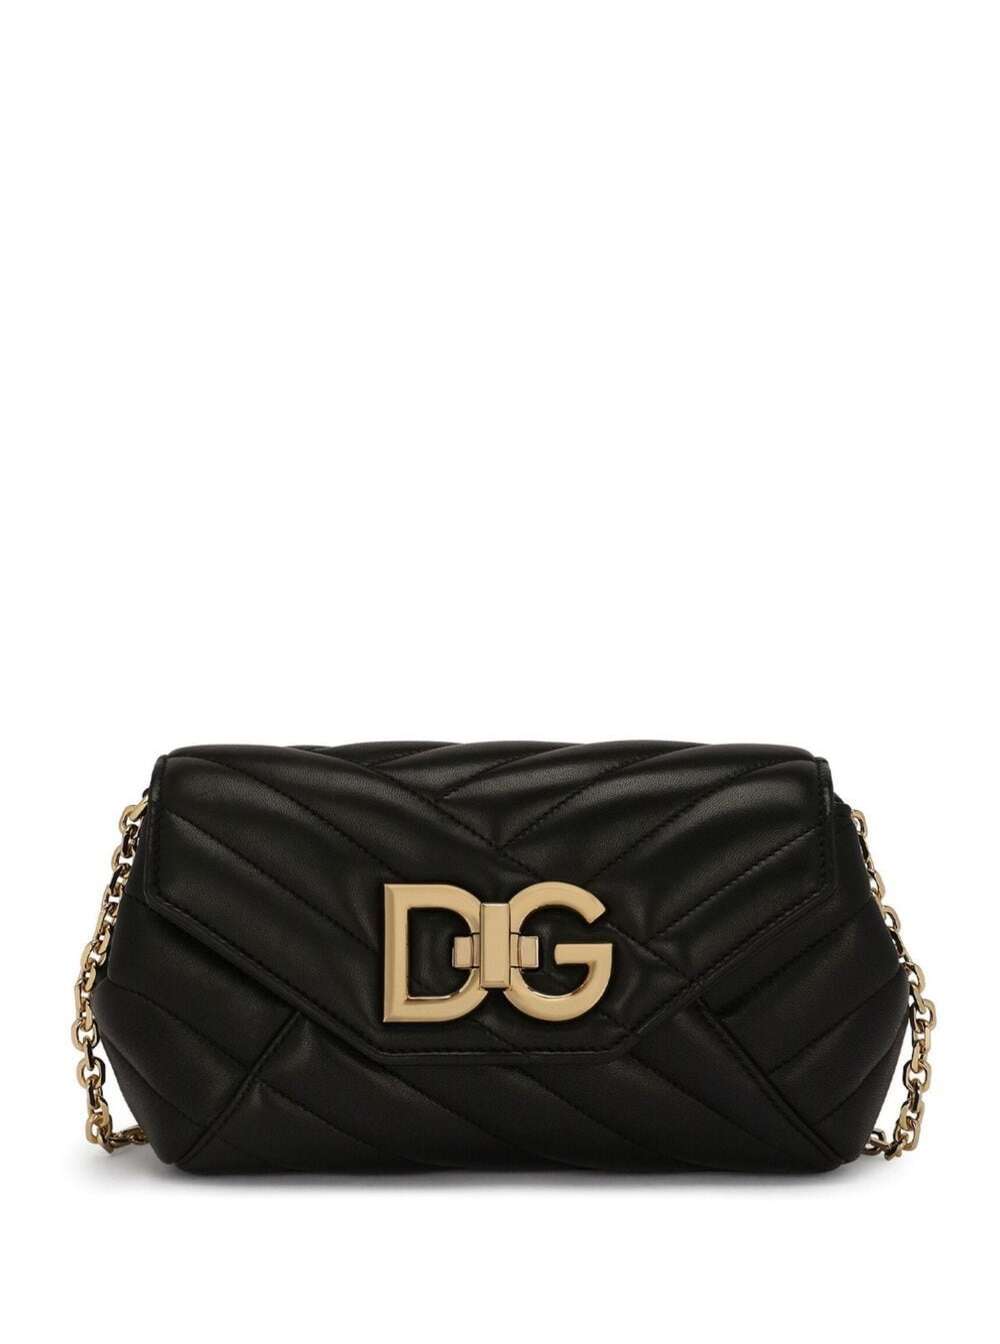 Dolce & Gabbana Lop Flap Quilted Bag